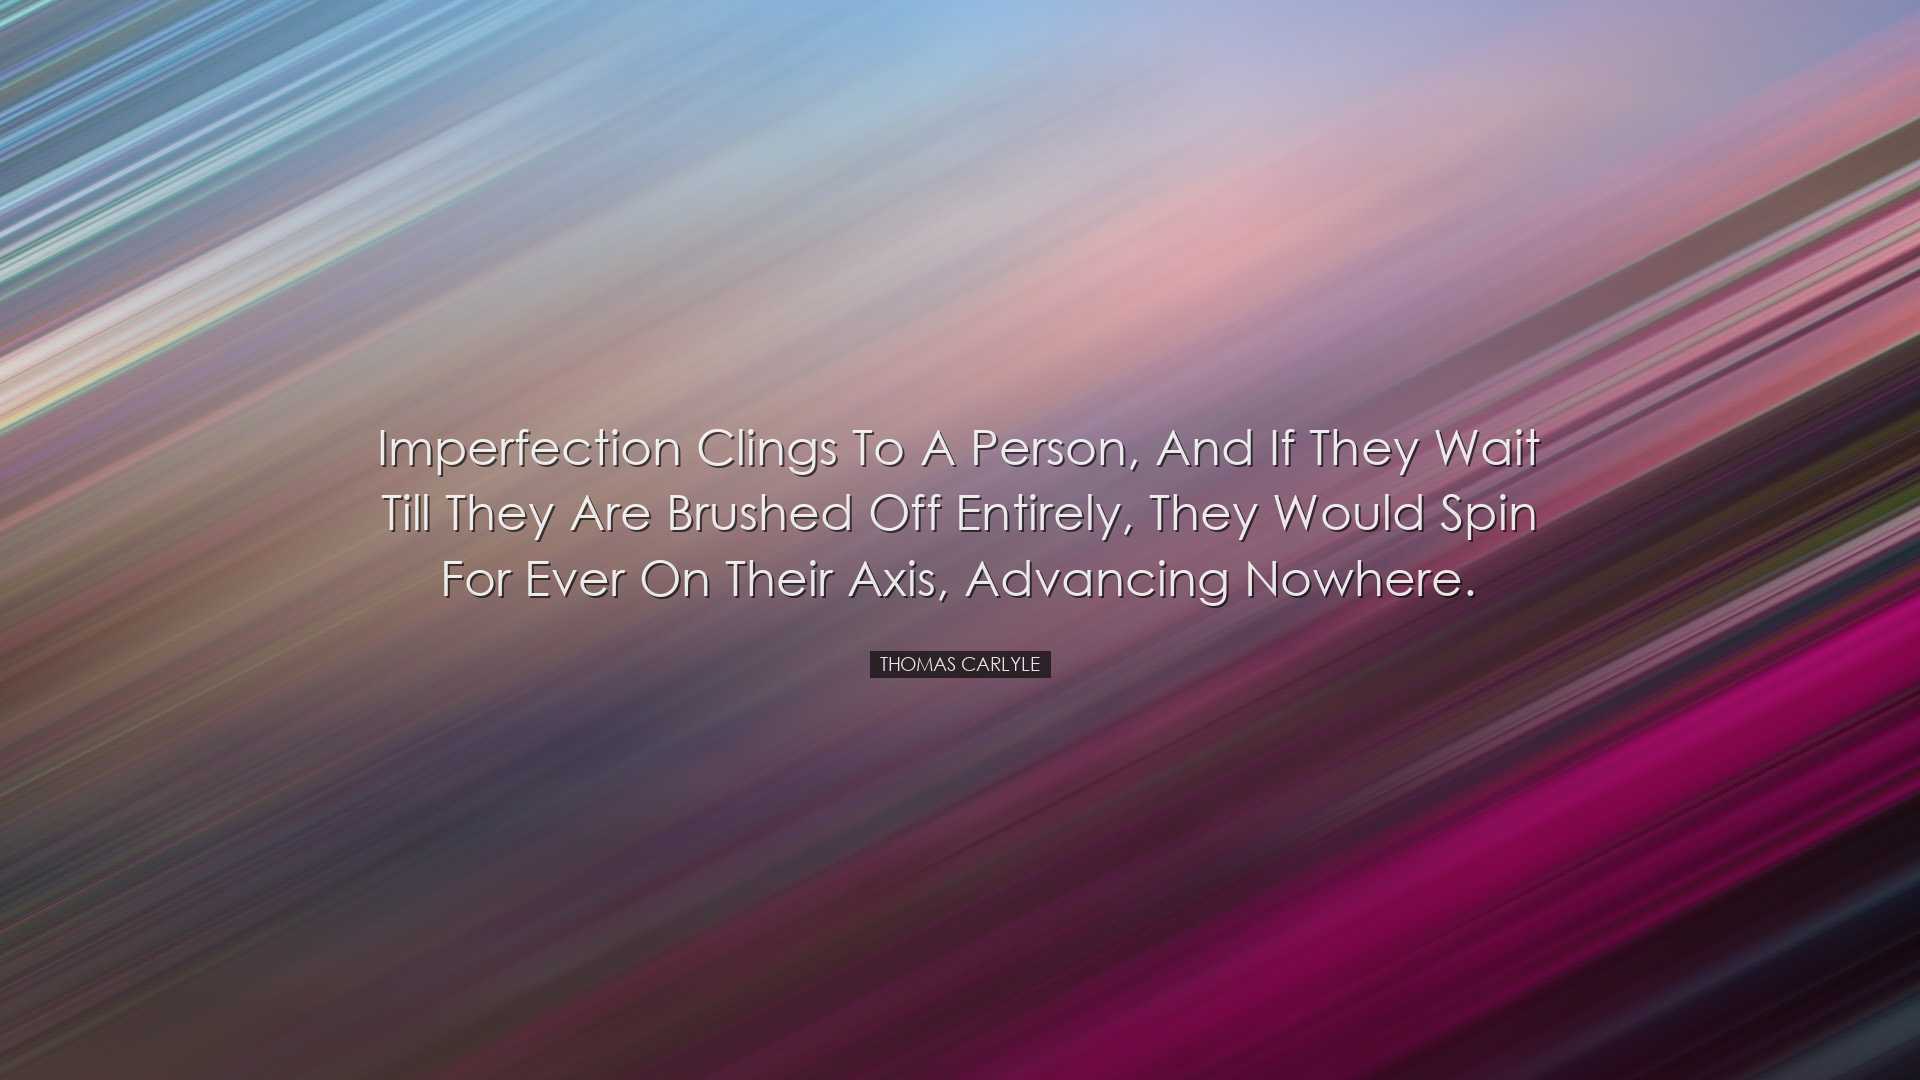 Imperfection clings to a person, and if they wait till they are br